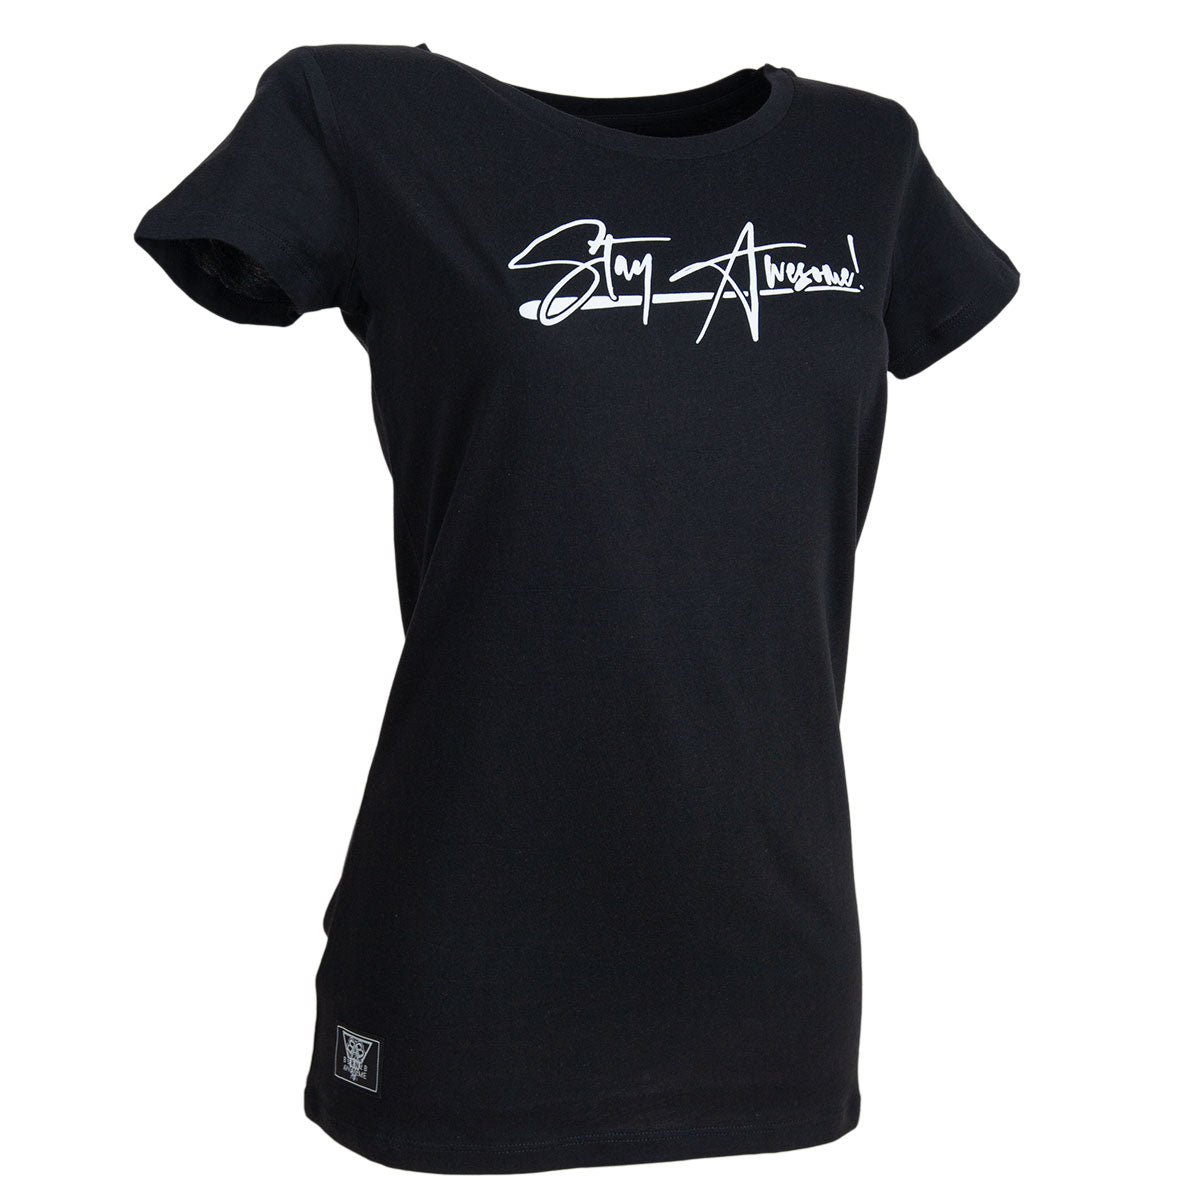 Stay Awesome Girlie Shirt - B2BA Clothing